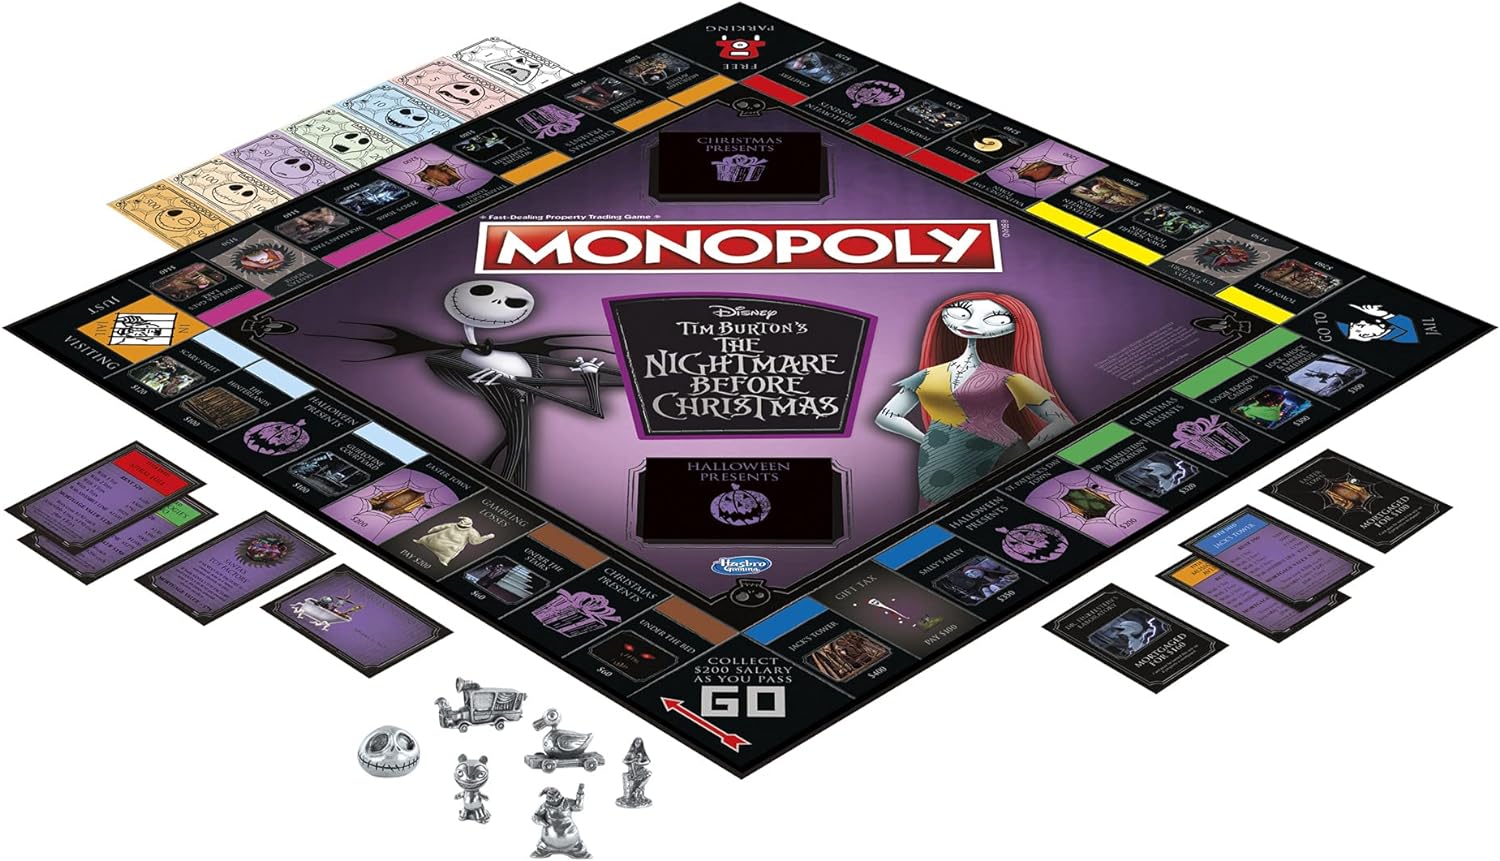 Monopoly: Disney Tim Burtons The Nightmare Before Christmas Edition Board Game, Fun Family Game for Kids Ages 8 and Up (Amazon Exclusive) For 6 Players